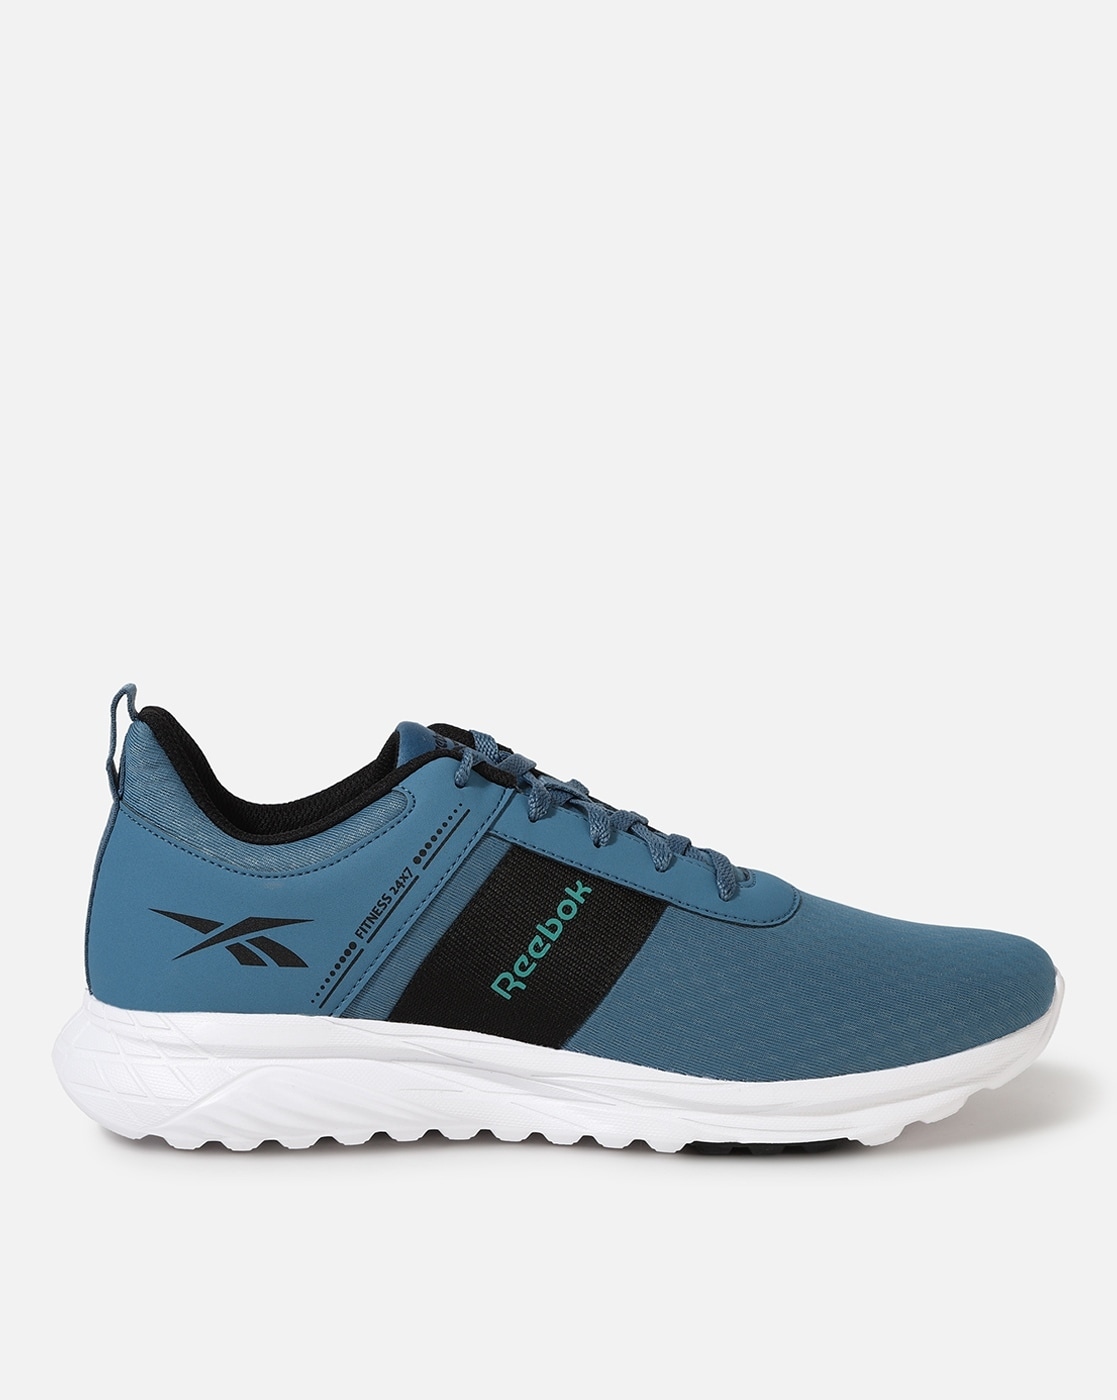 Buy Blue Sports Shoes for Men by Online Ajio.com